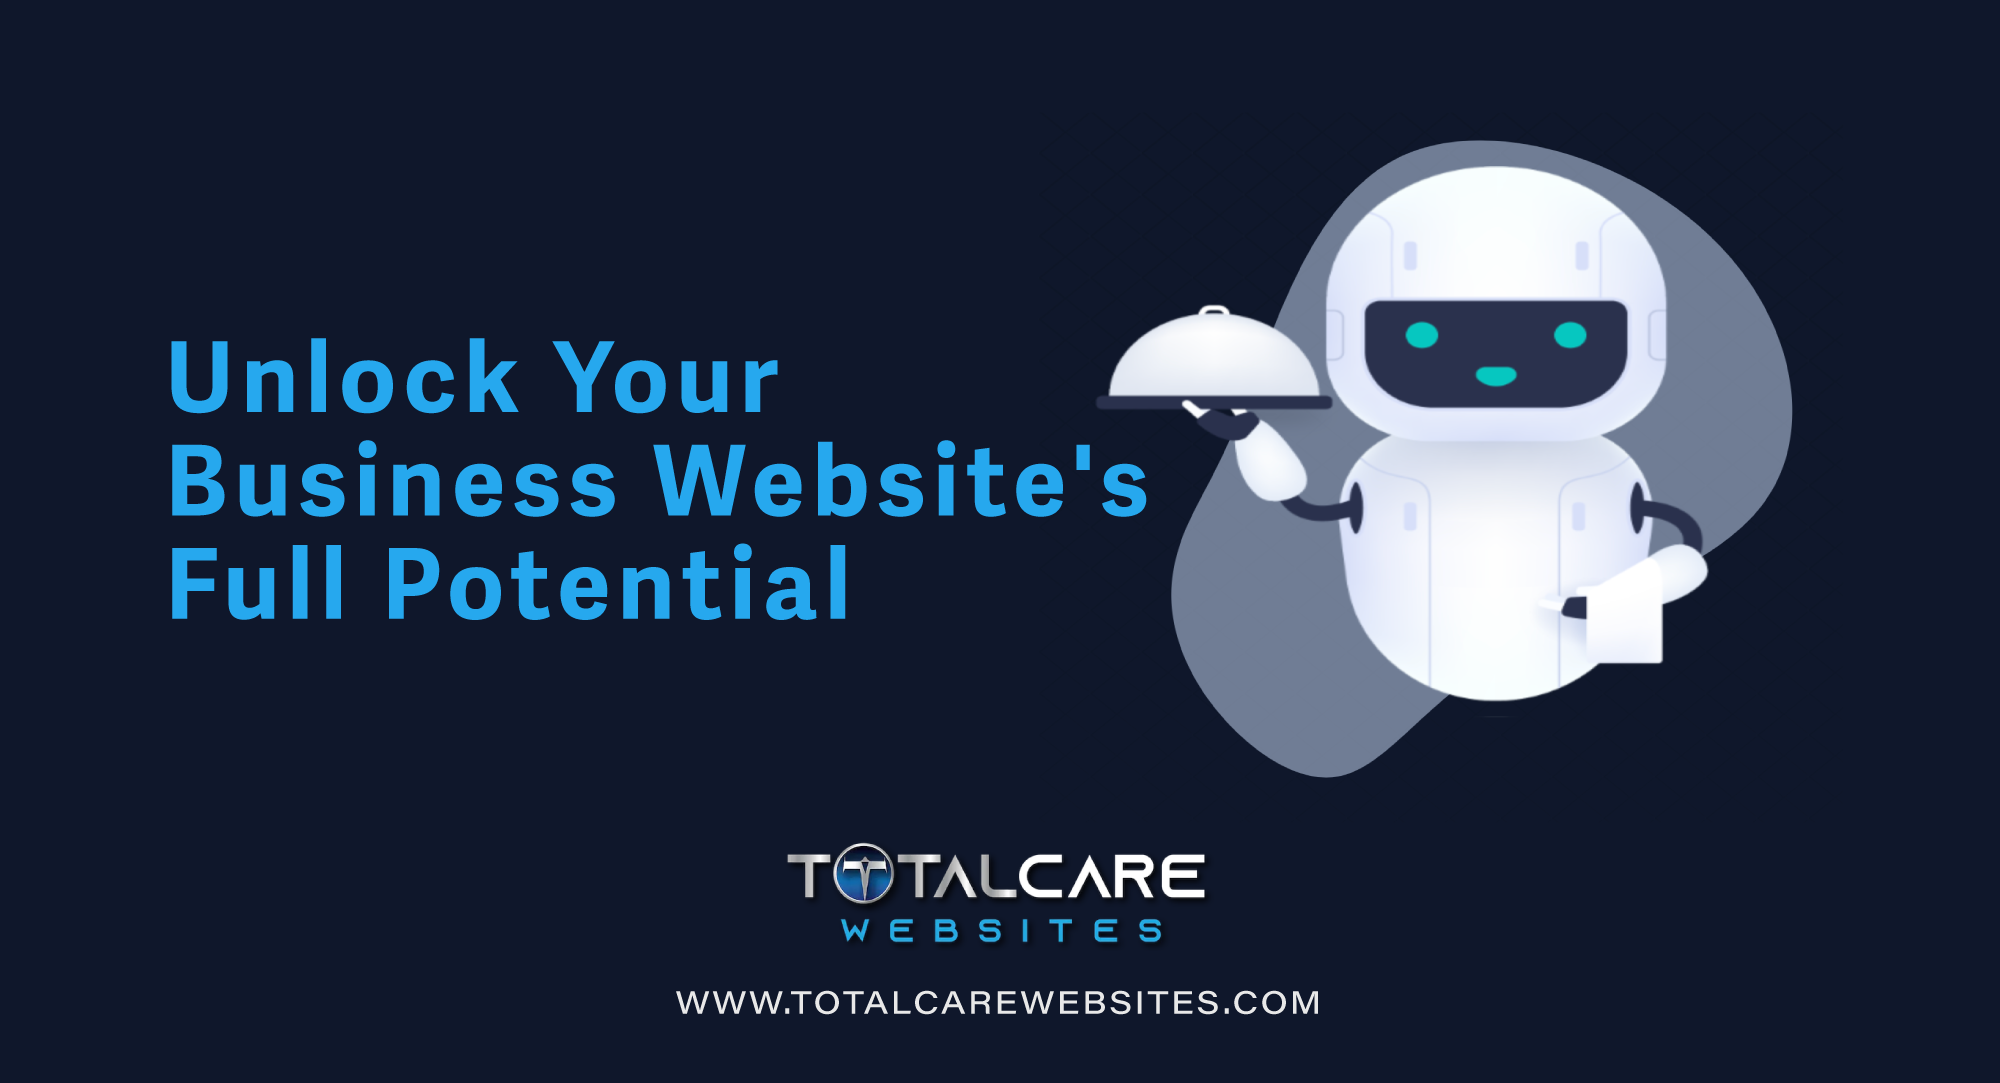 Take your business website to the next level with Total Care Websites! Our experienced team will help you create and maintain a powerful online presence that reflects your brand. Get started today and unlock the full potential of your business website.